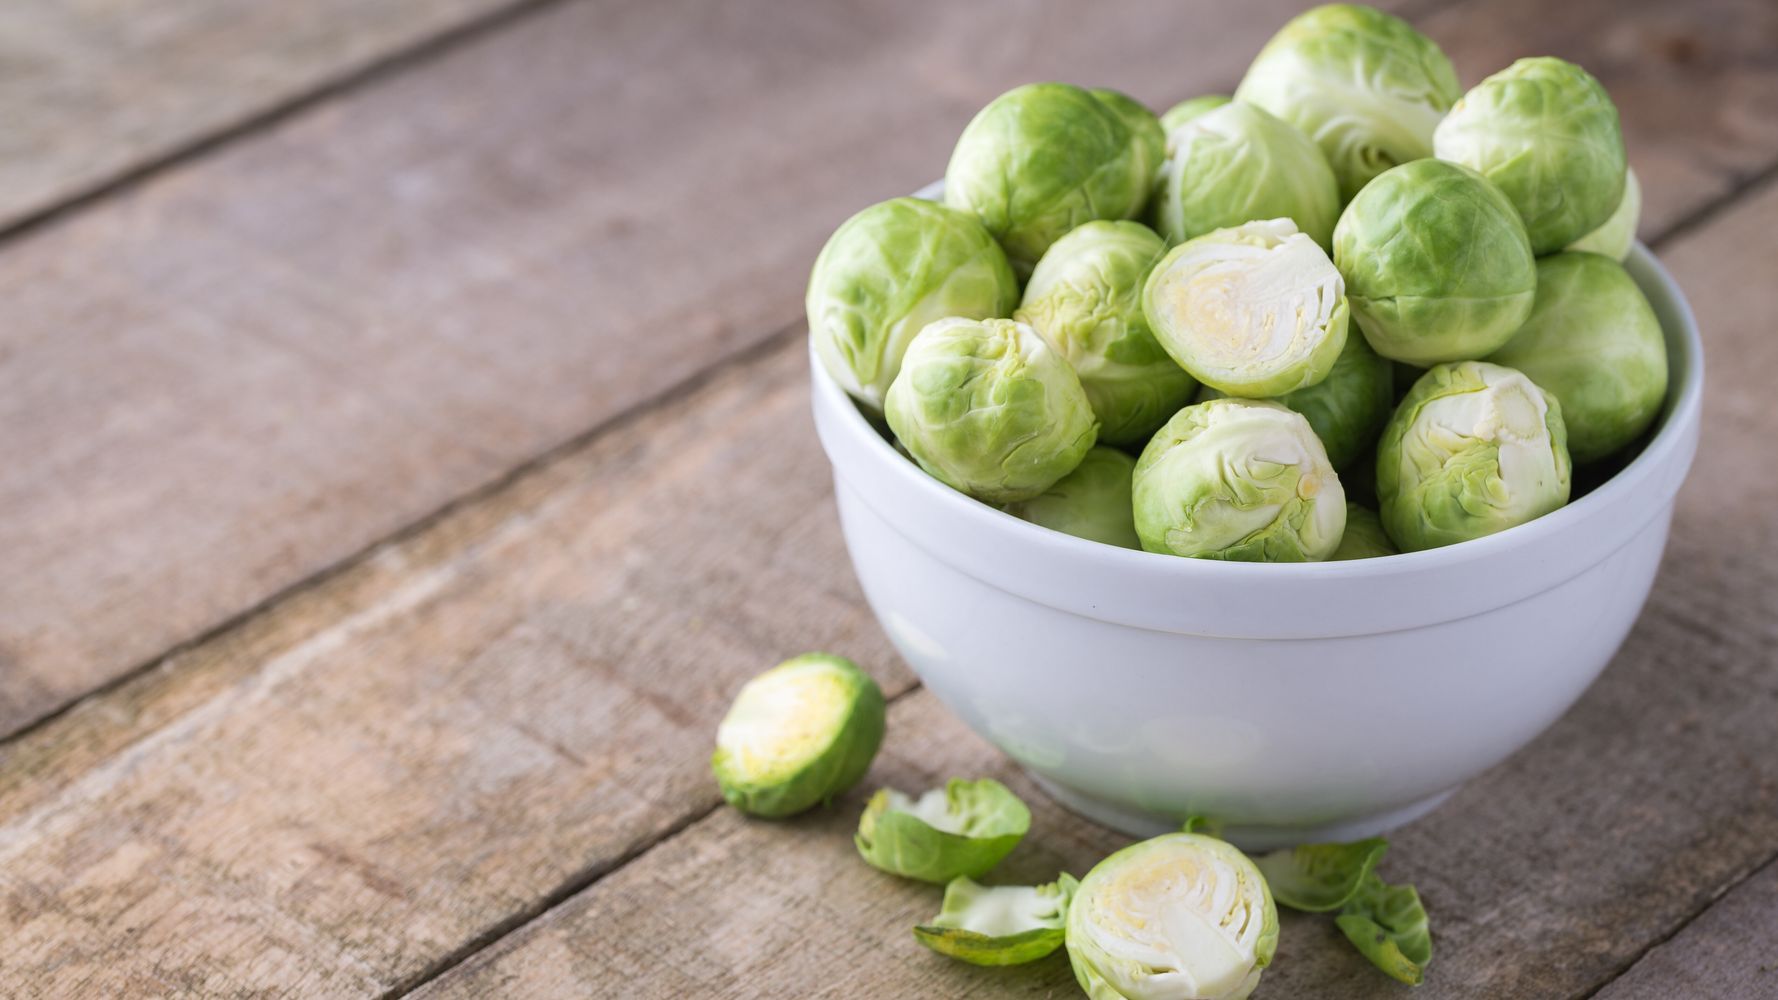 Why Does Brussel Sprouts Make You Fart